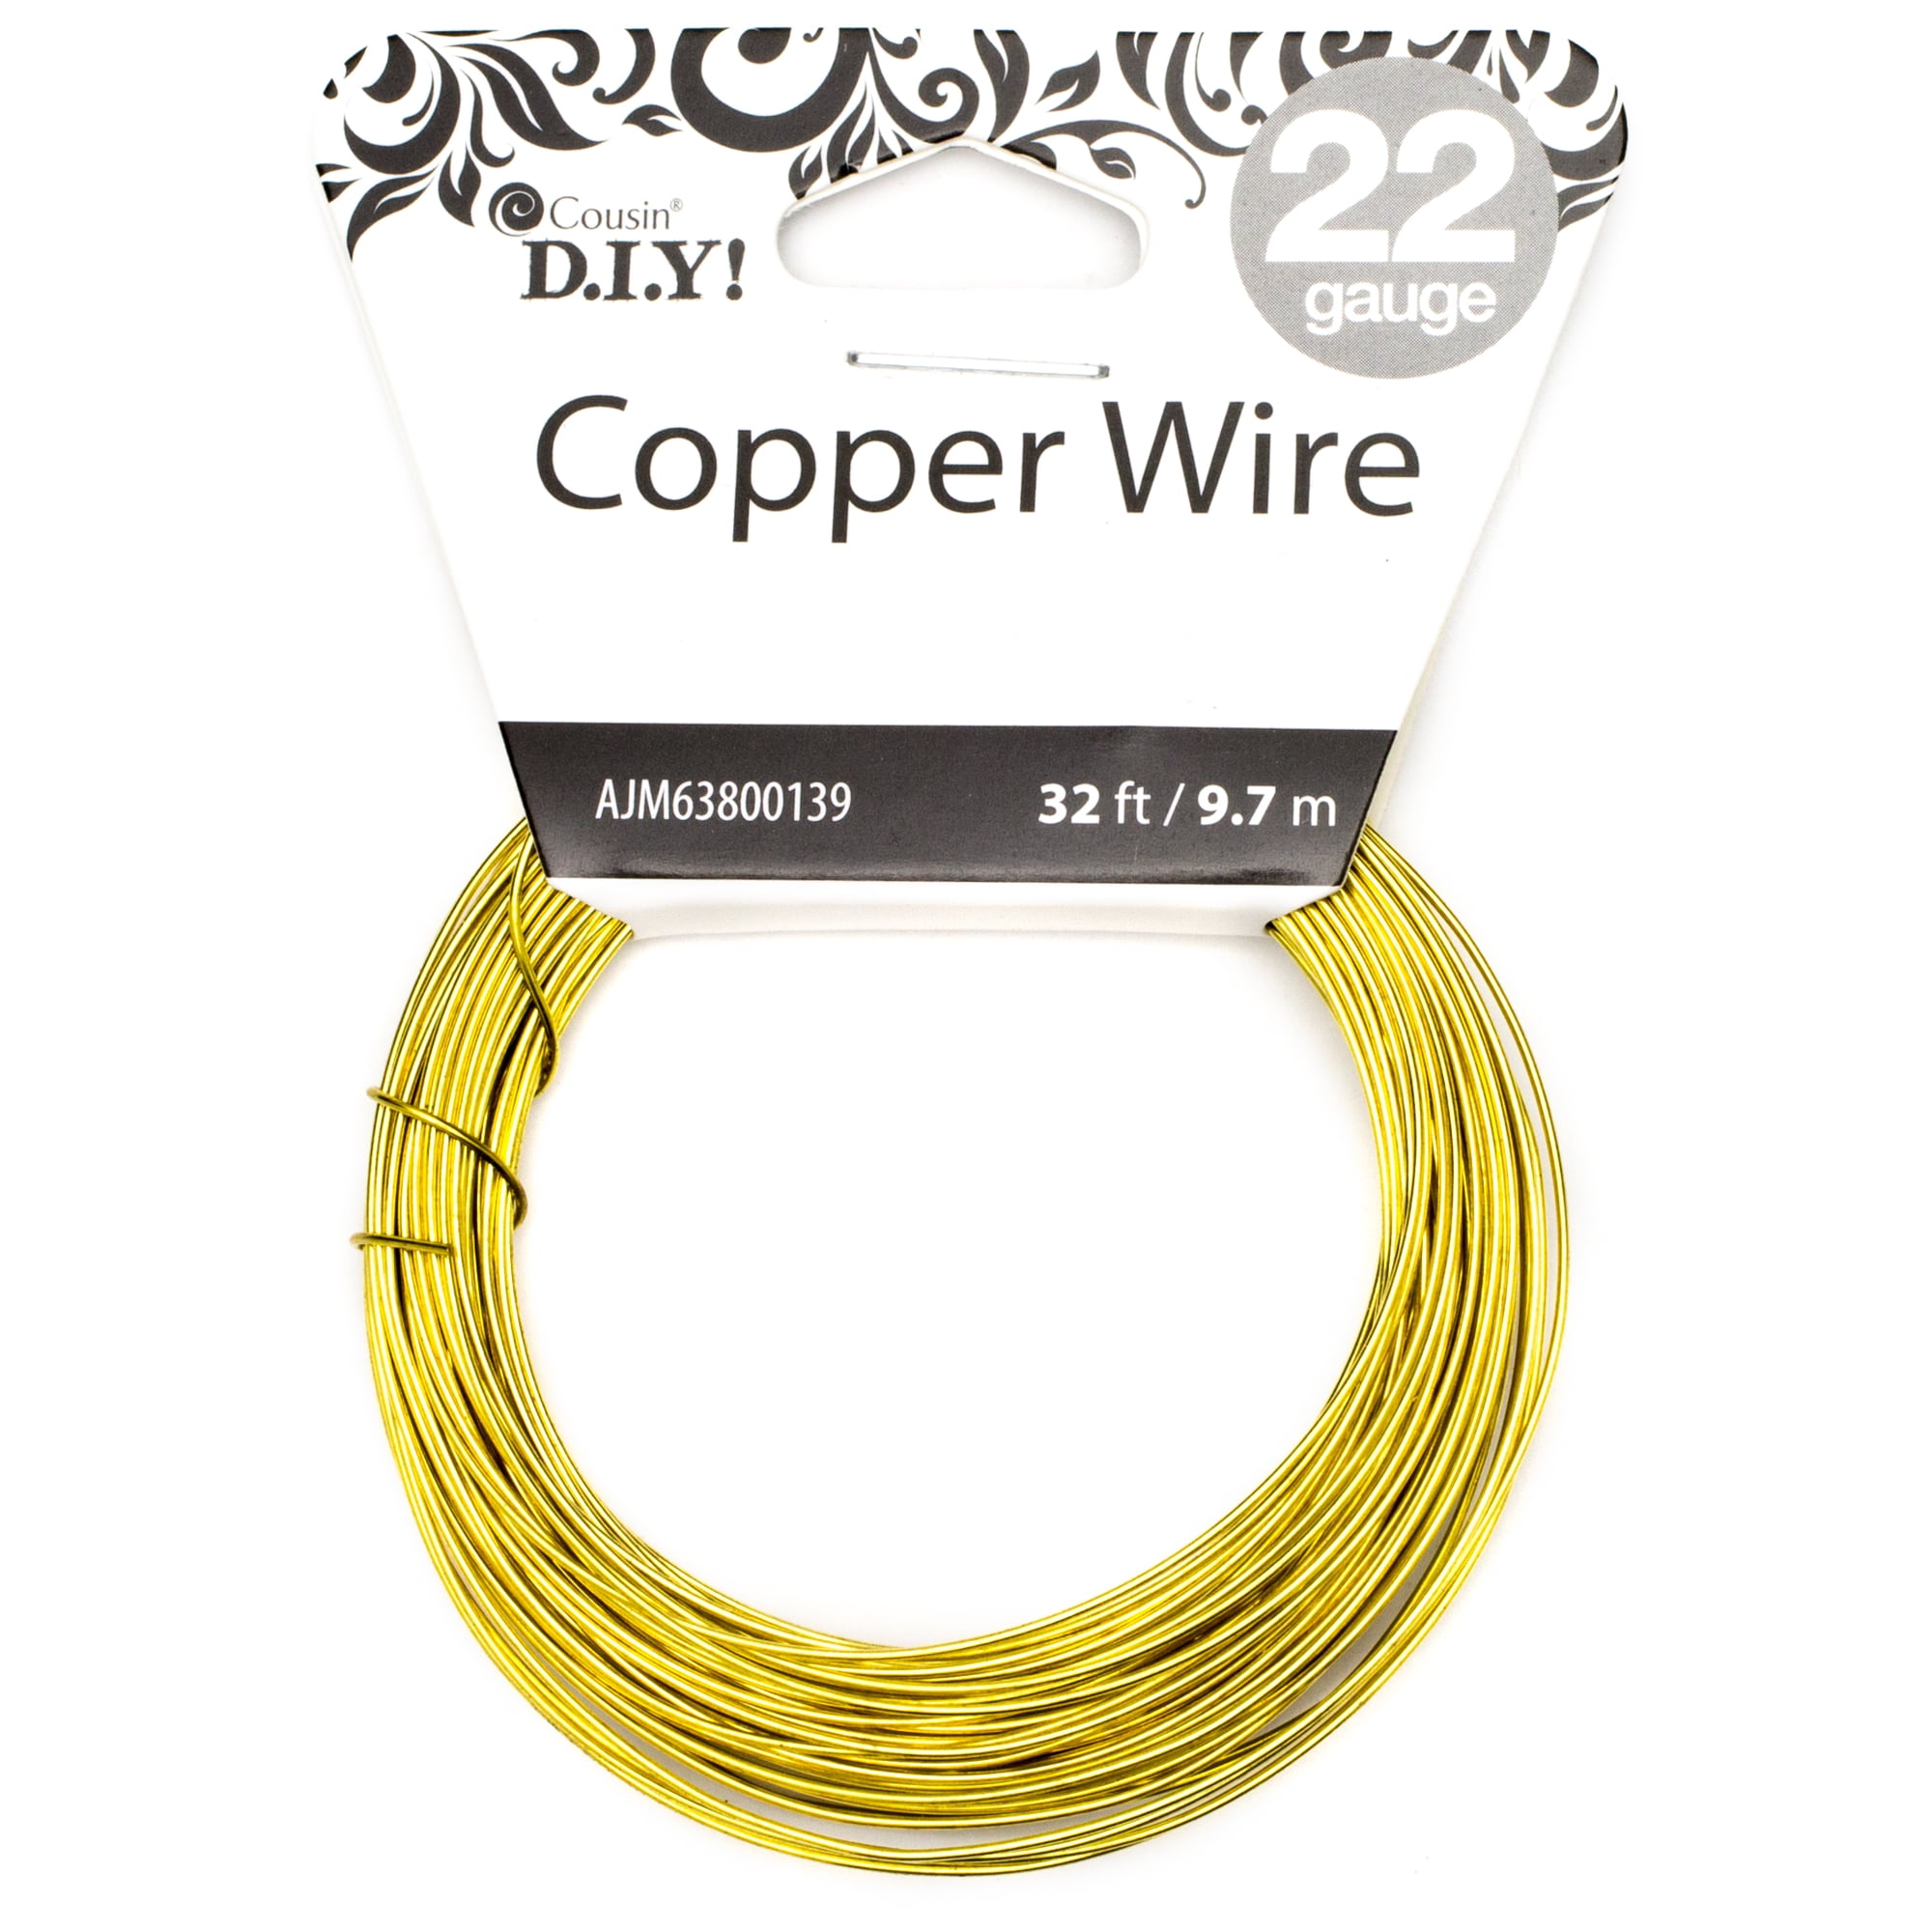 Cousin DIY 22 Gauge Silver Finish Copper Jewelry Beading Wire, 32 ft Pcs,  Case of 720 